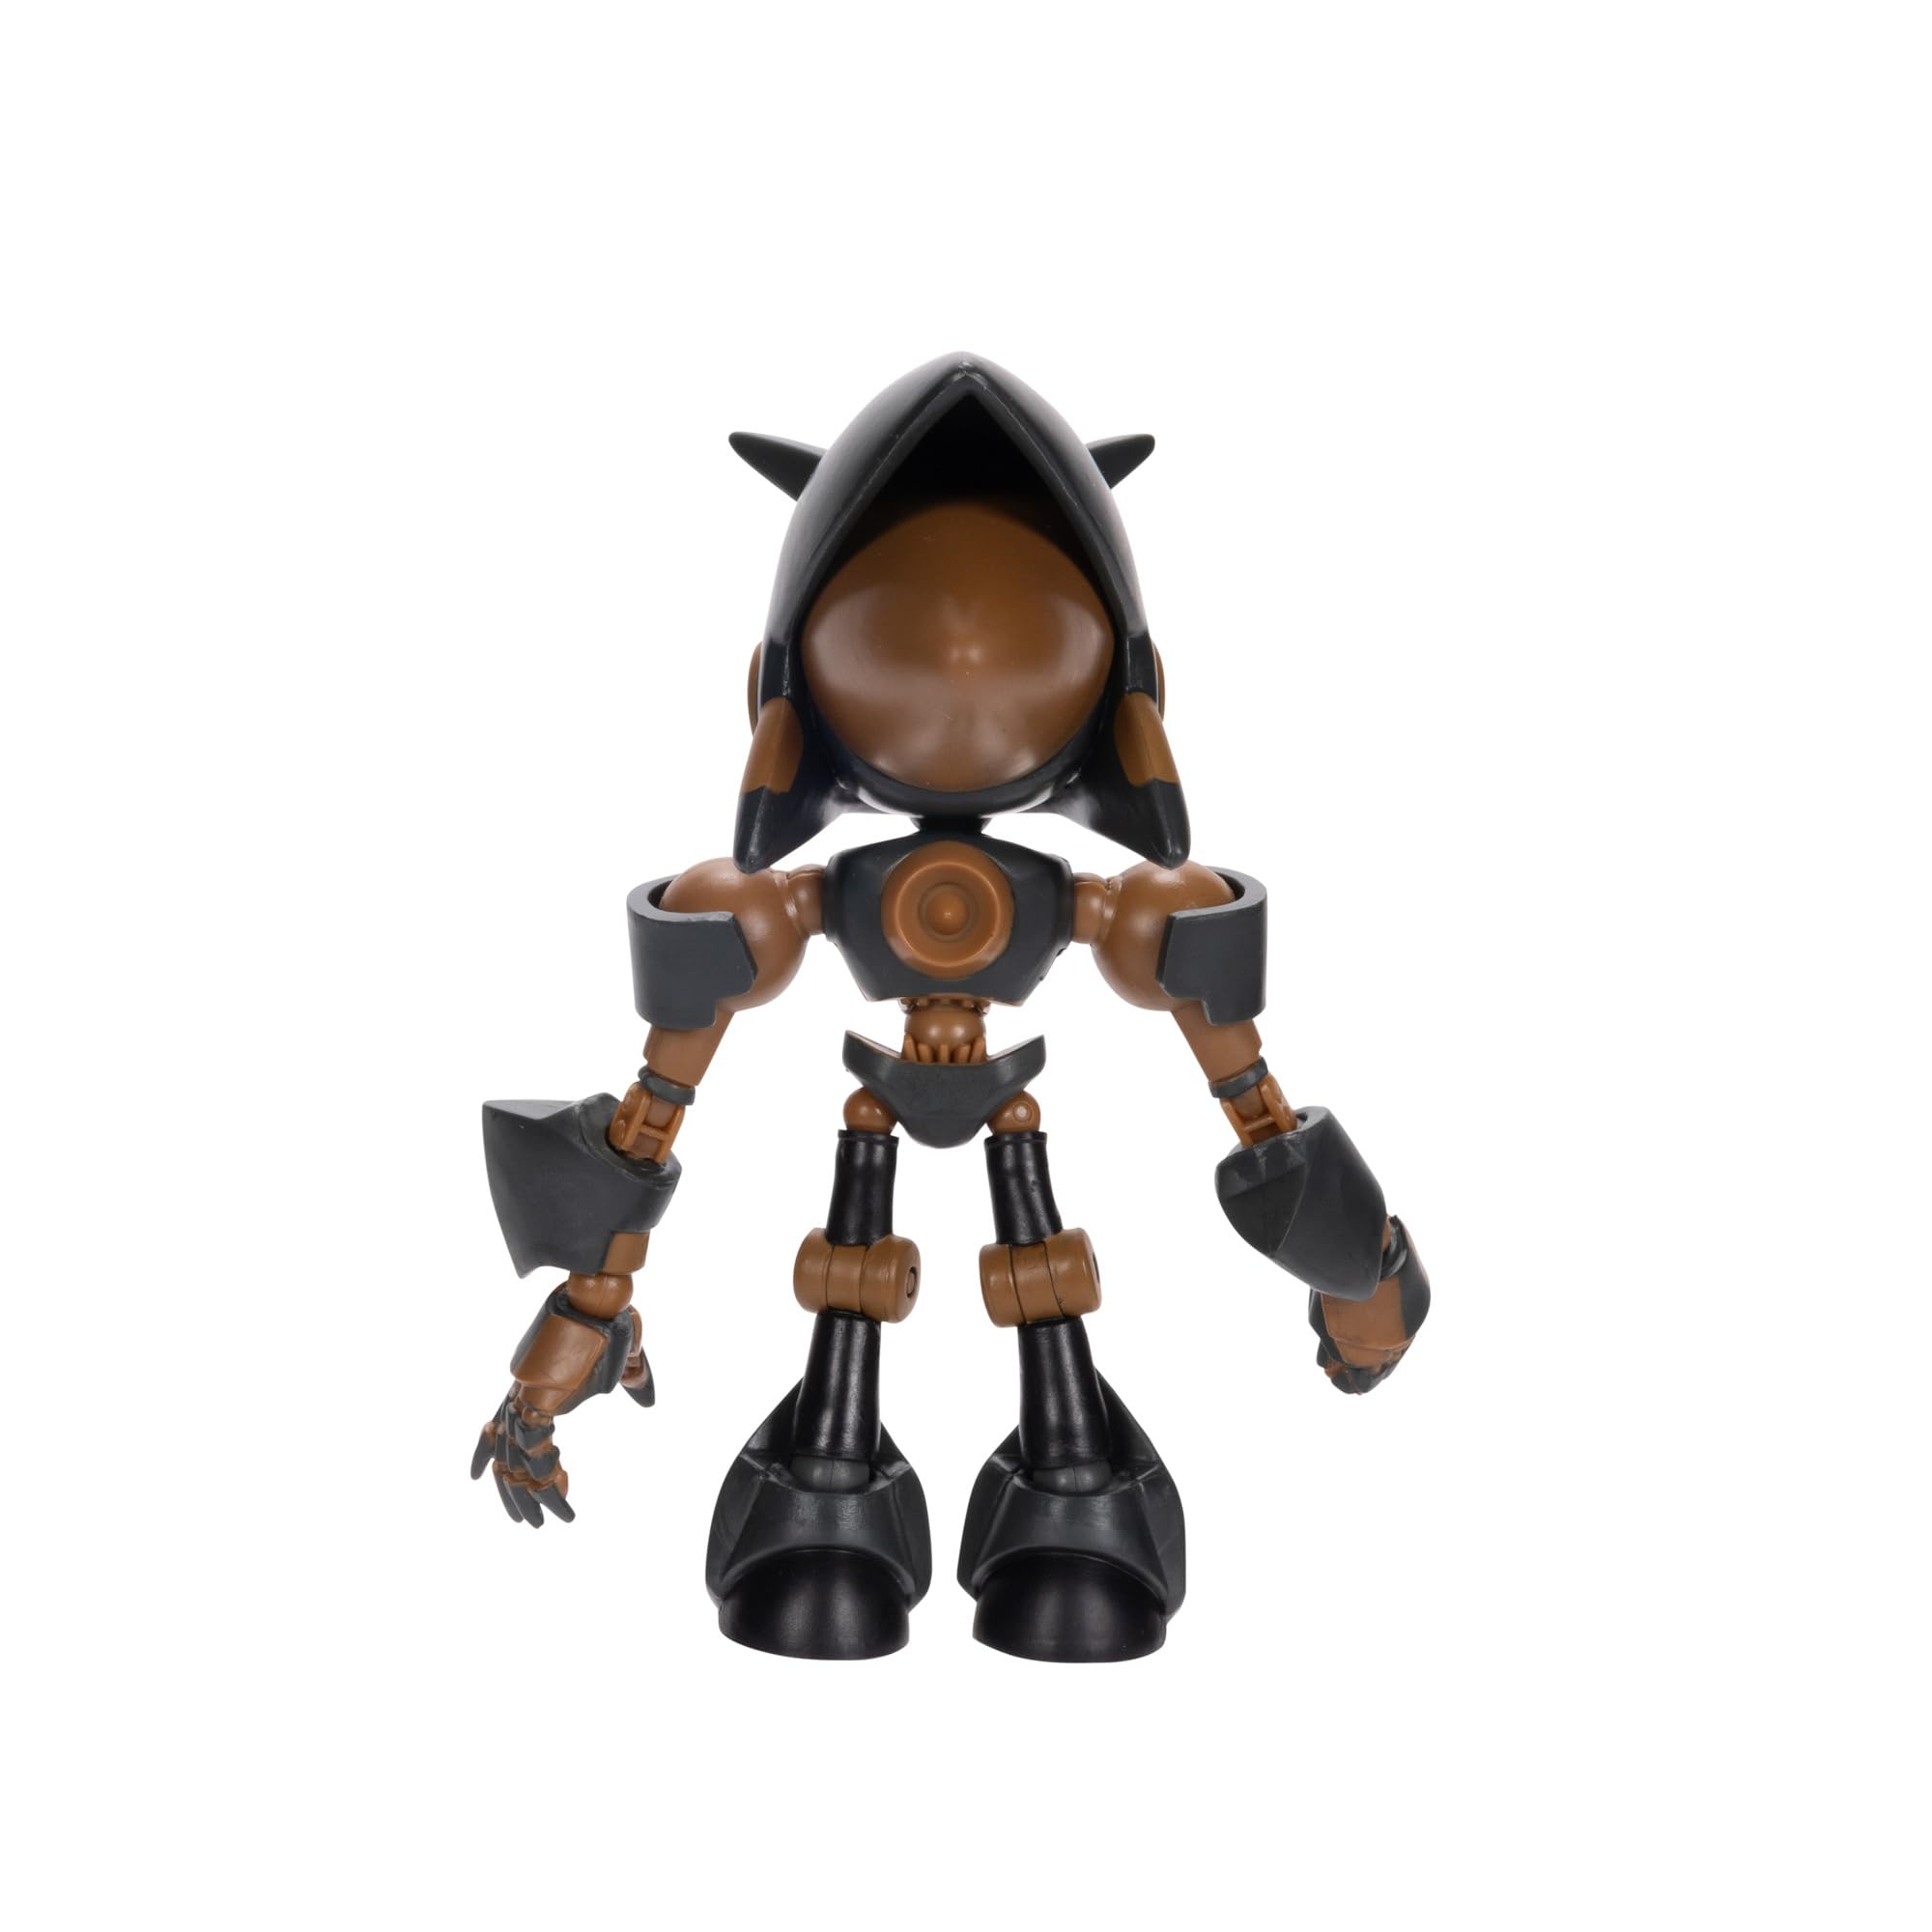 Sonic Prime 5-inch Sonic Trooper - The Grim Action Figure 13 Points of Articulations. Ages 3+ (Officially Licensed by Sega and Netflix)